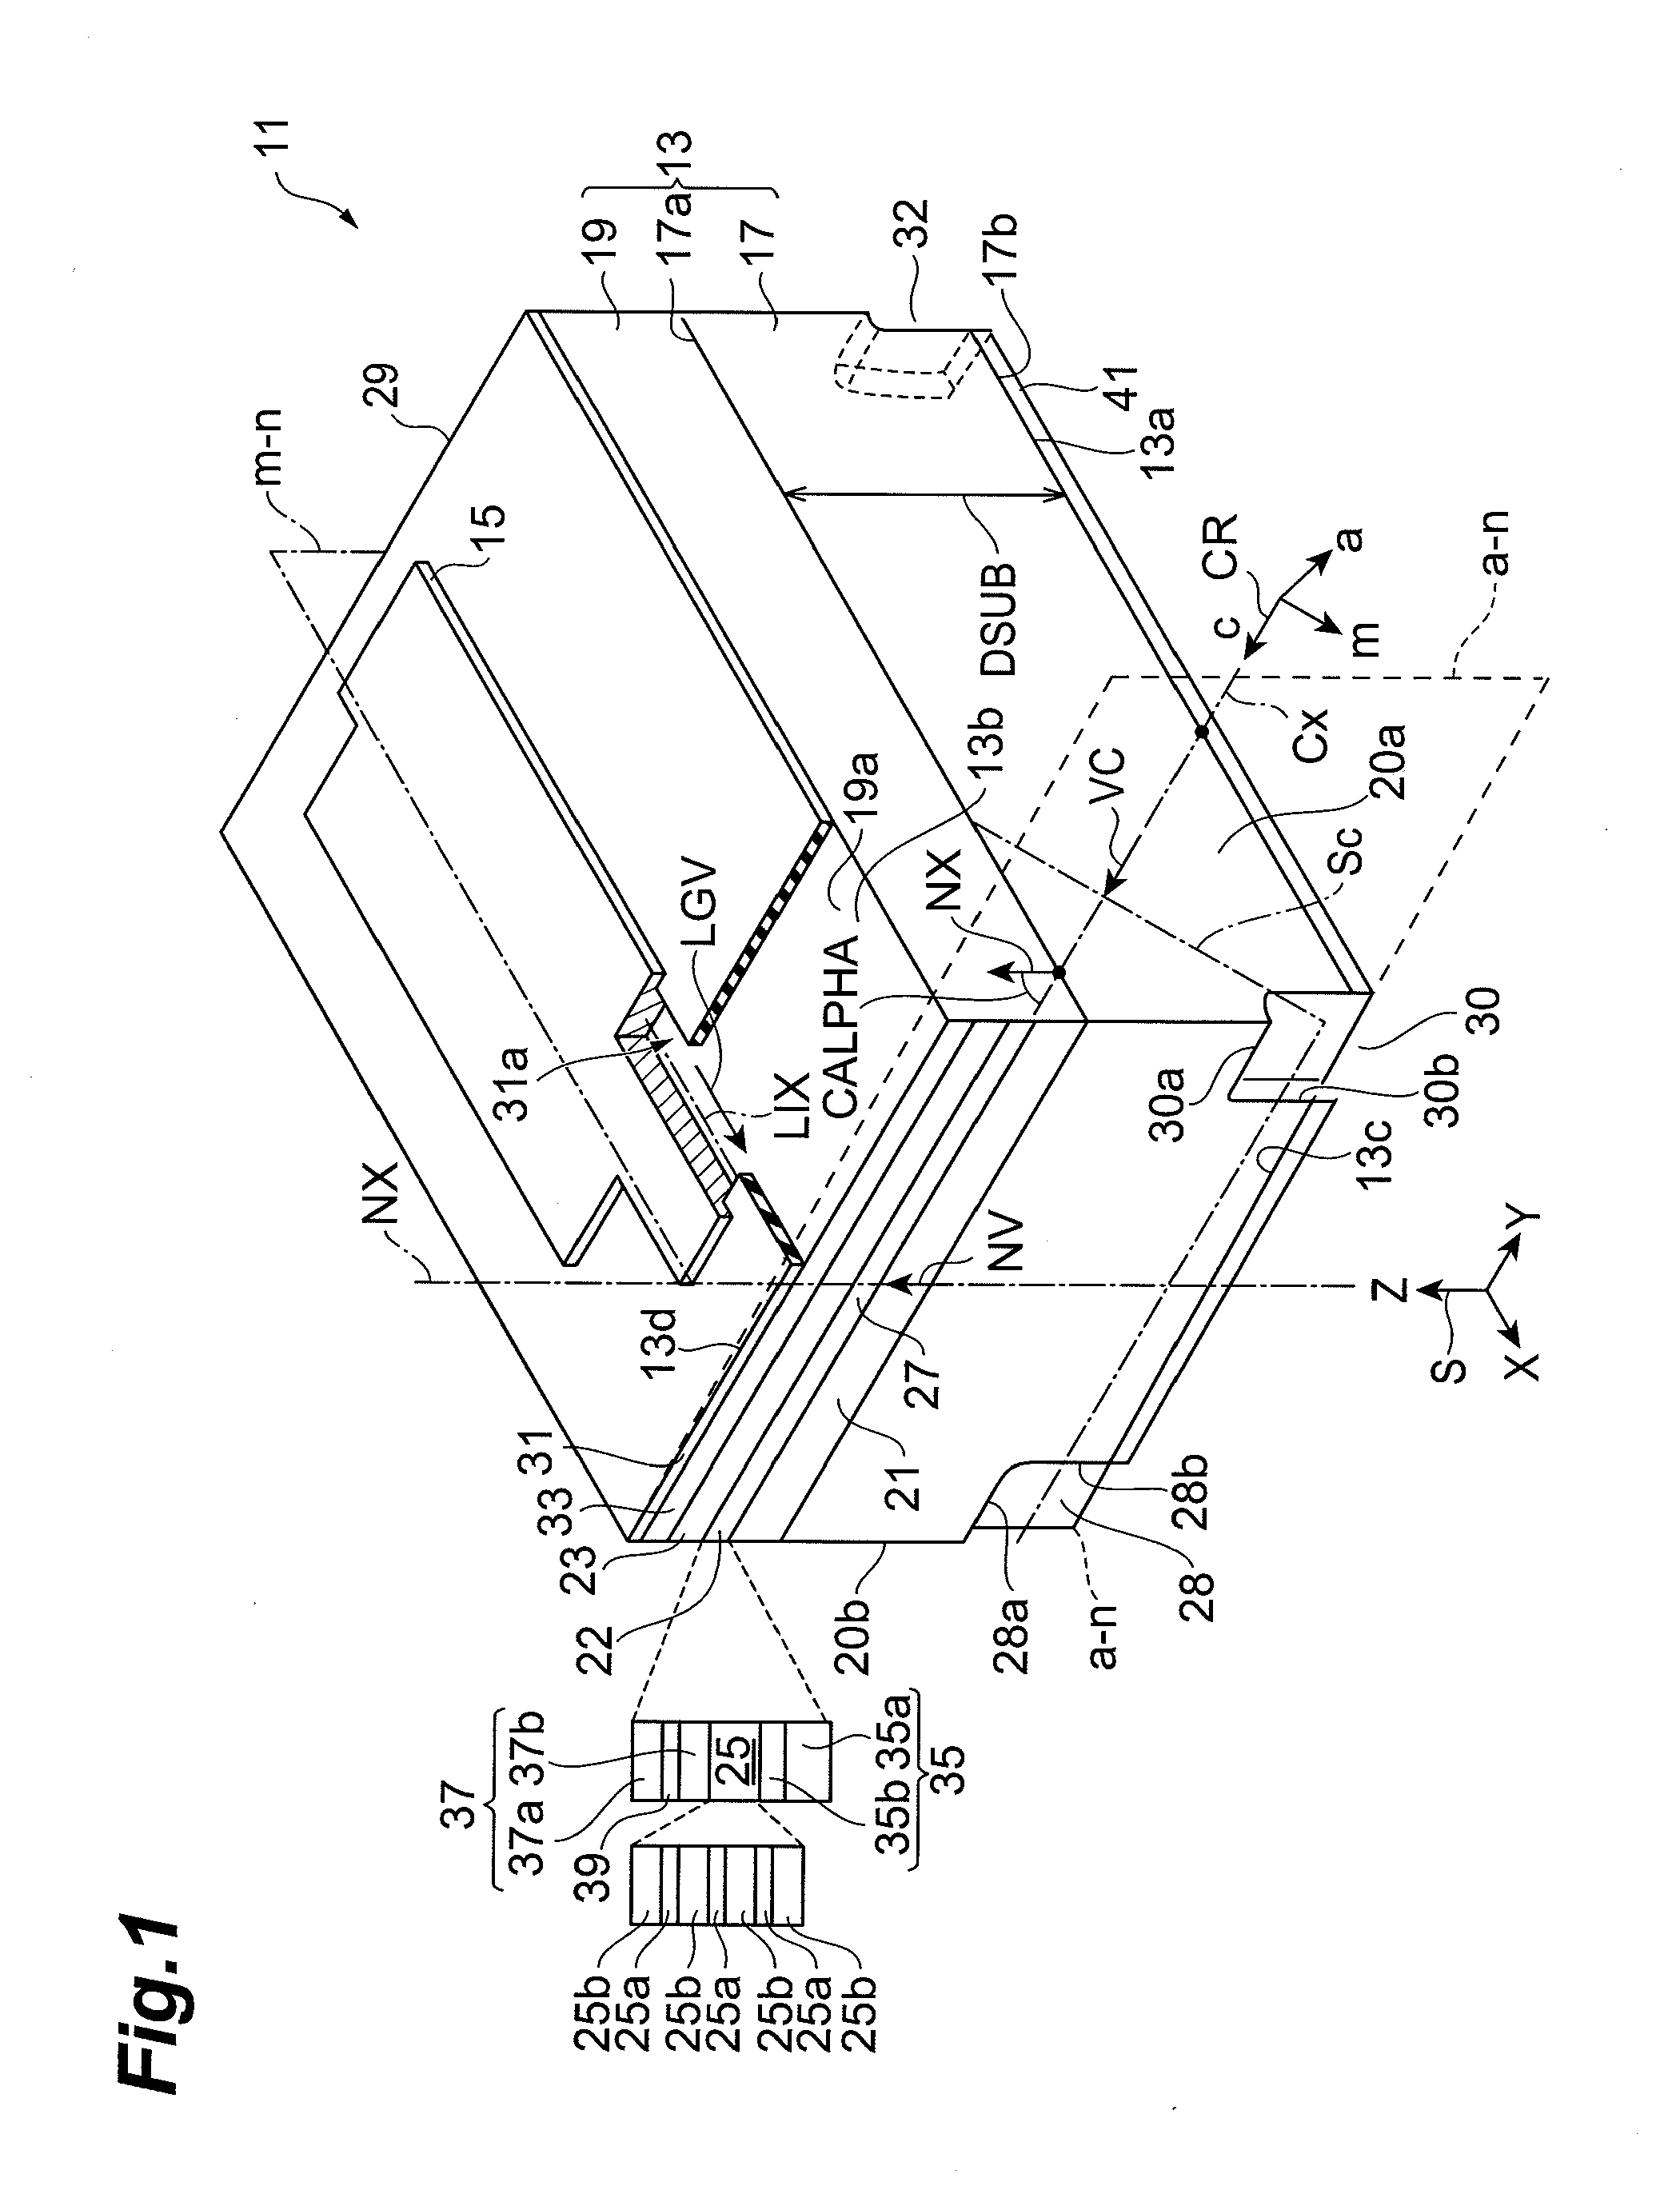 Group-iii nitride semiconductor laser device, and method of fabricating group-iii nitride semiconductor laser device